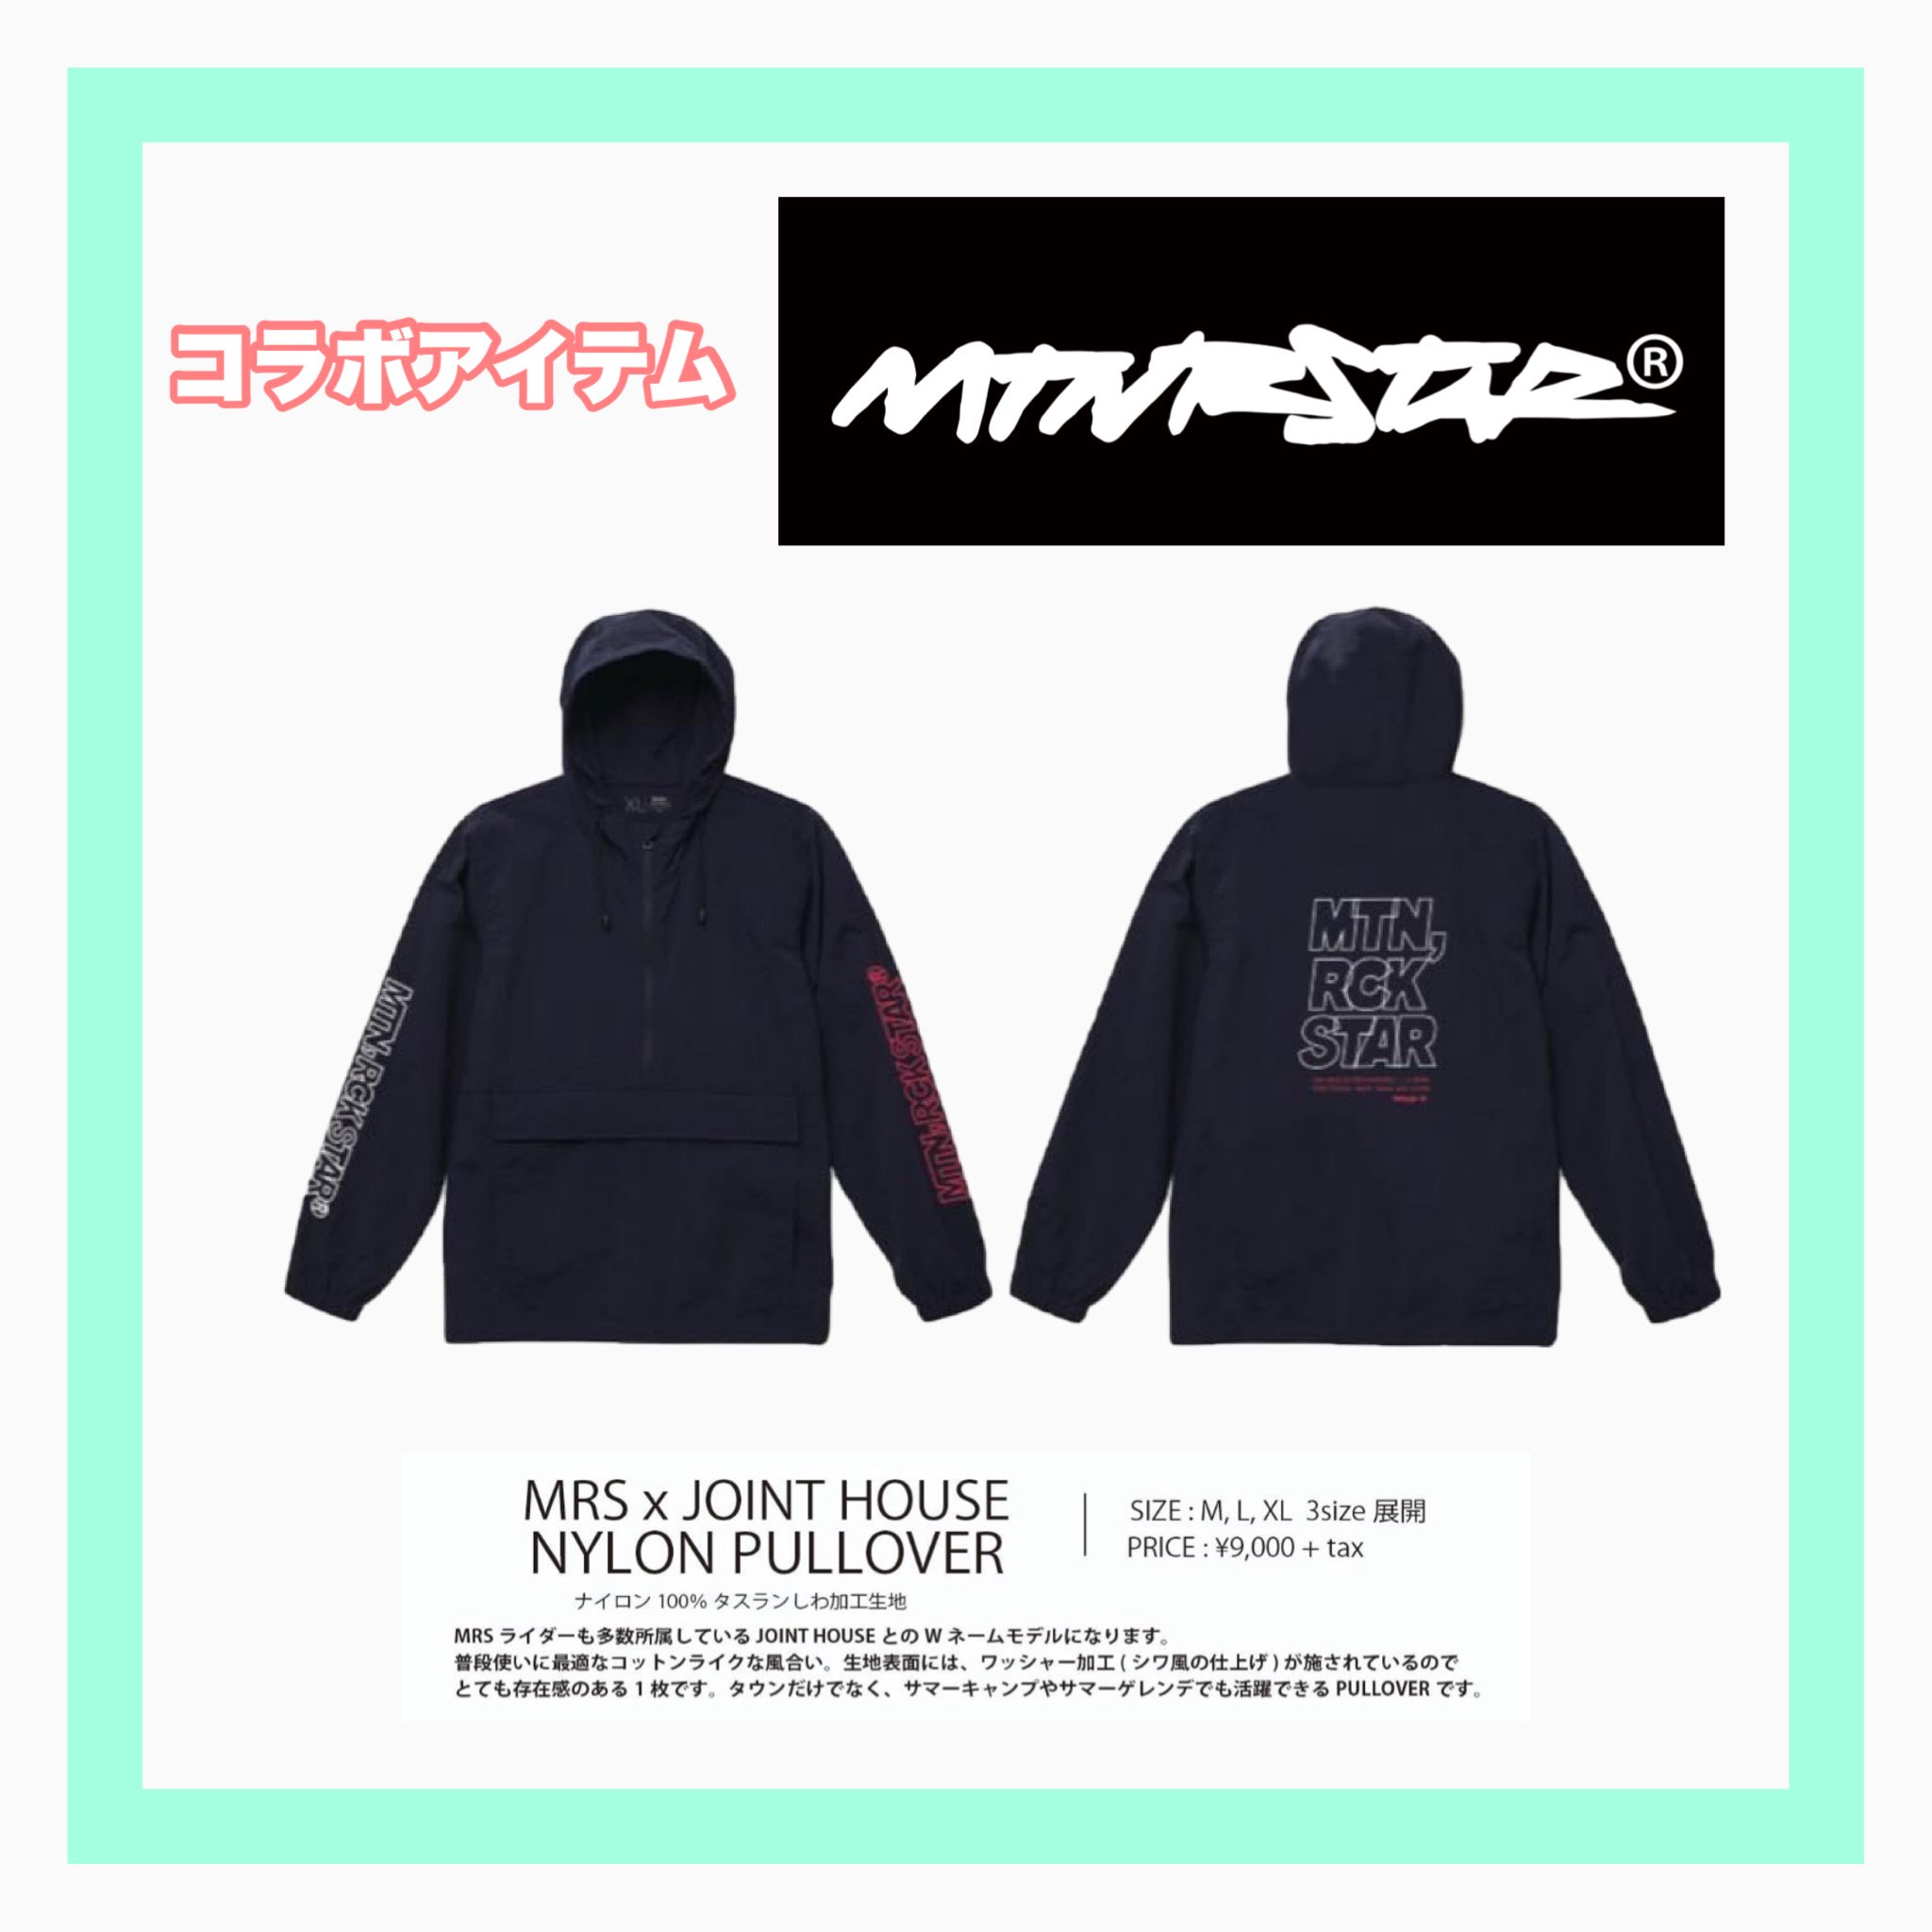 <img class='new_mark_img1' src='https://img.shop-pro.jp/img/new/icons14.gif' style='border:none;display:inline;margin:0px;padding:0px;width:auto;' />MOUNTAIN ROCK STAR Summer Apparel NYLON PULLOVER X JOINT HOUSEܥǥ